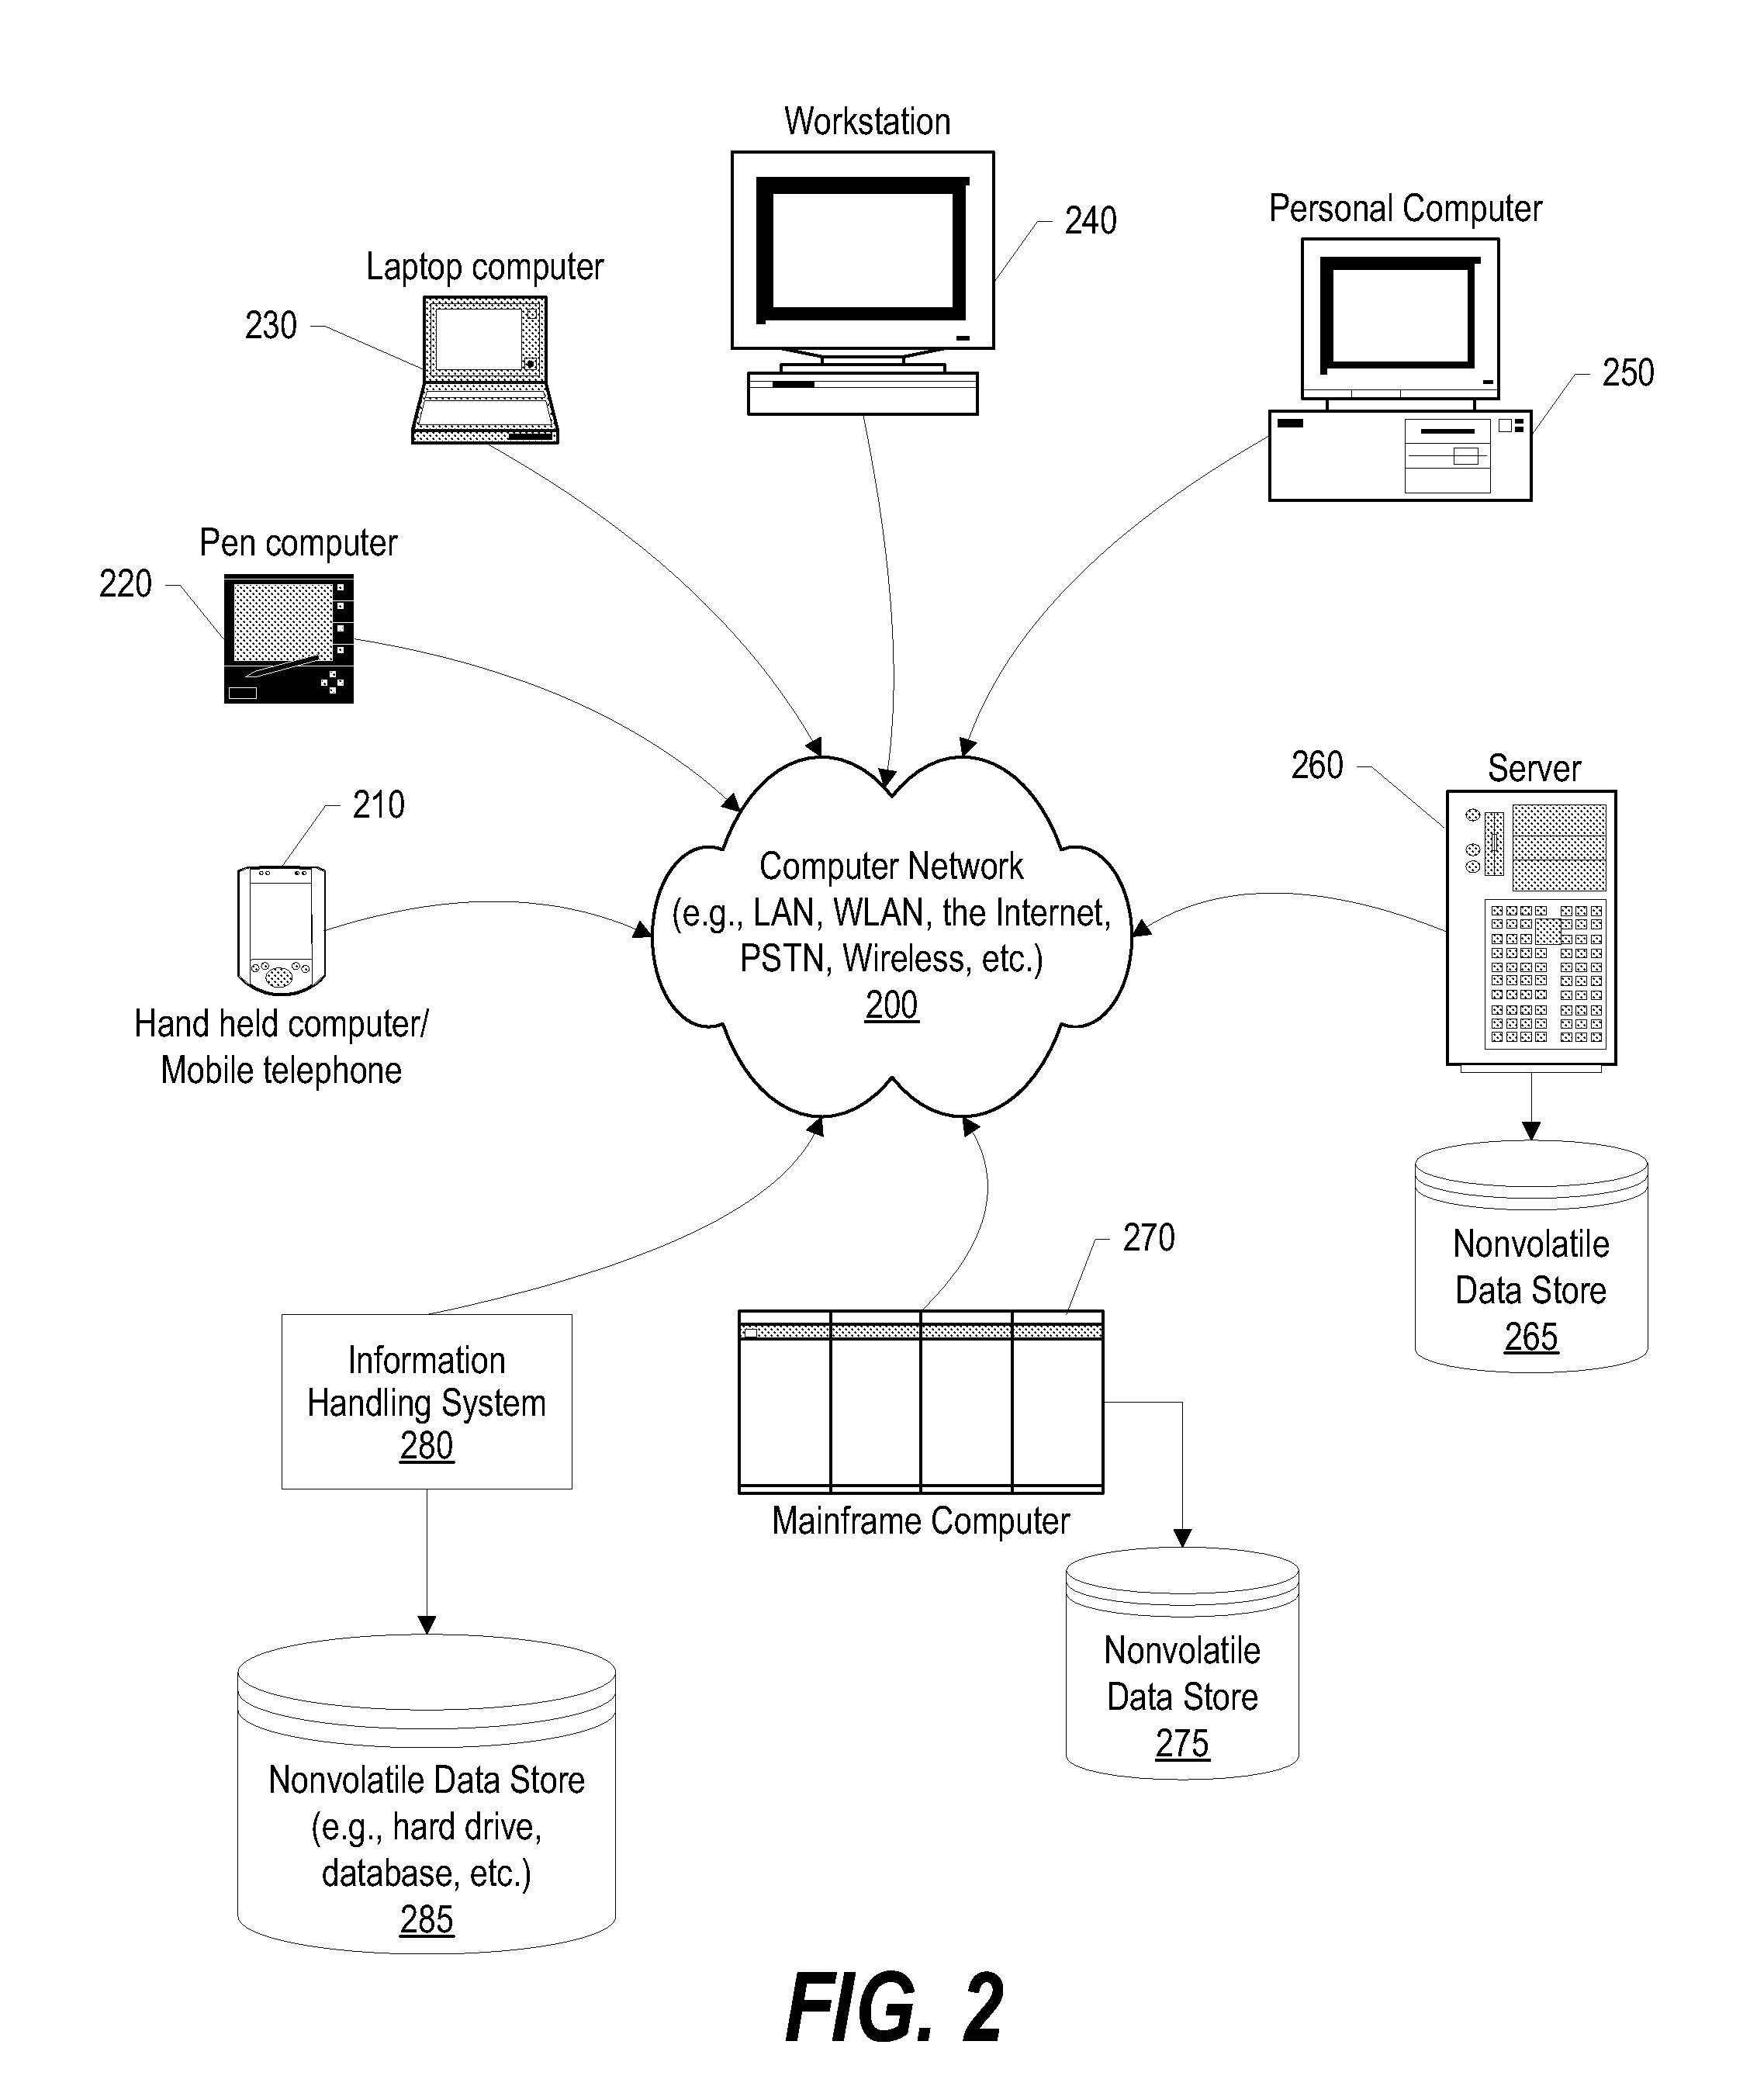 System and method for using remote module on vios to manage backups to remote backup servers